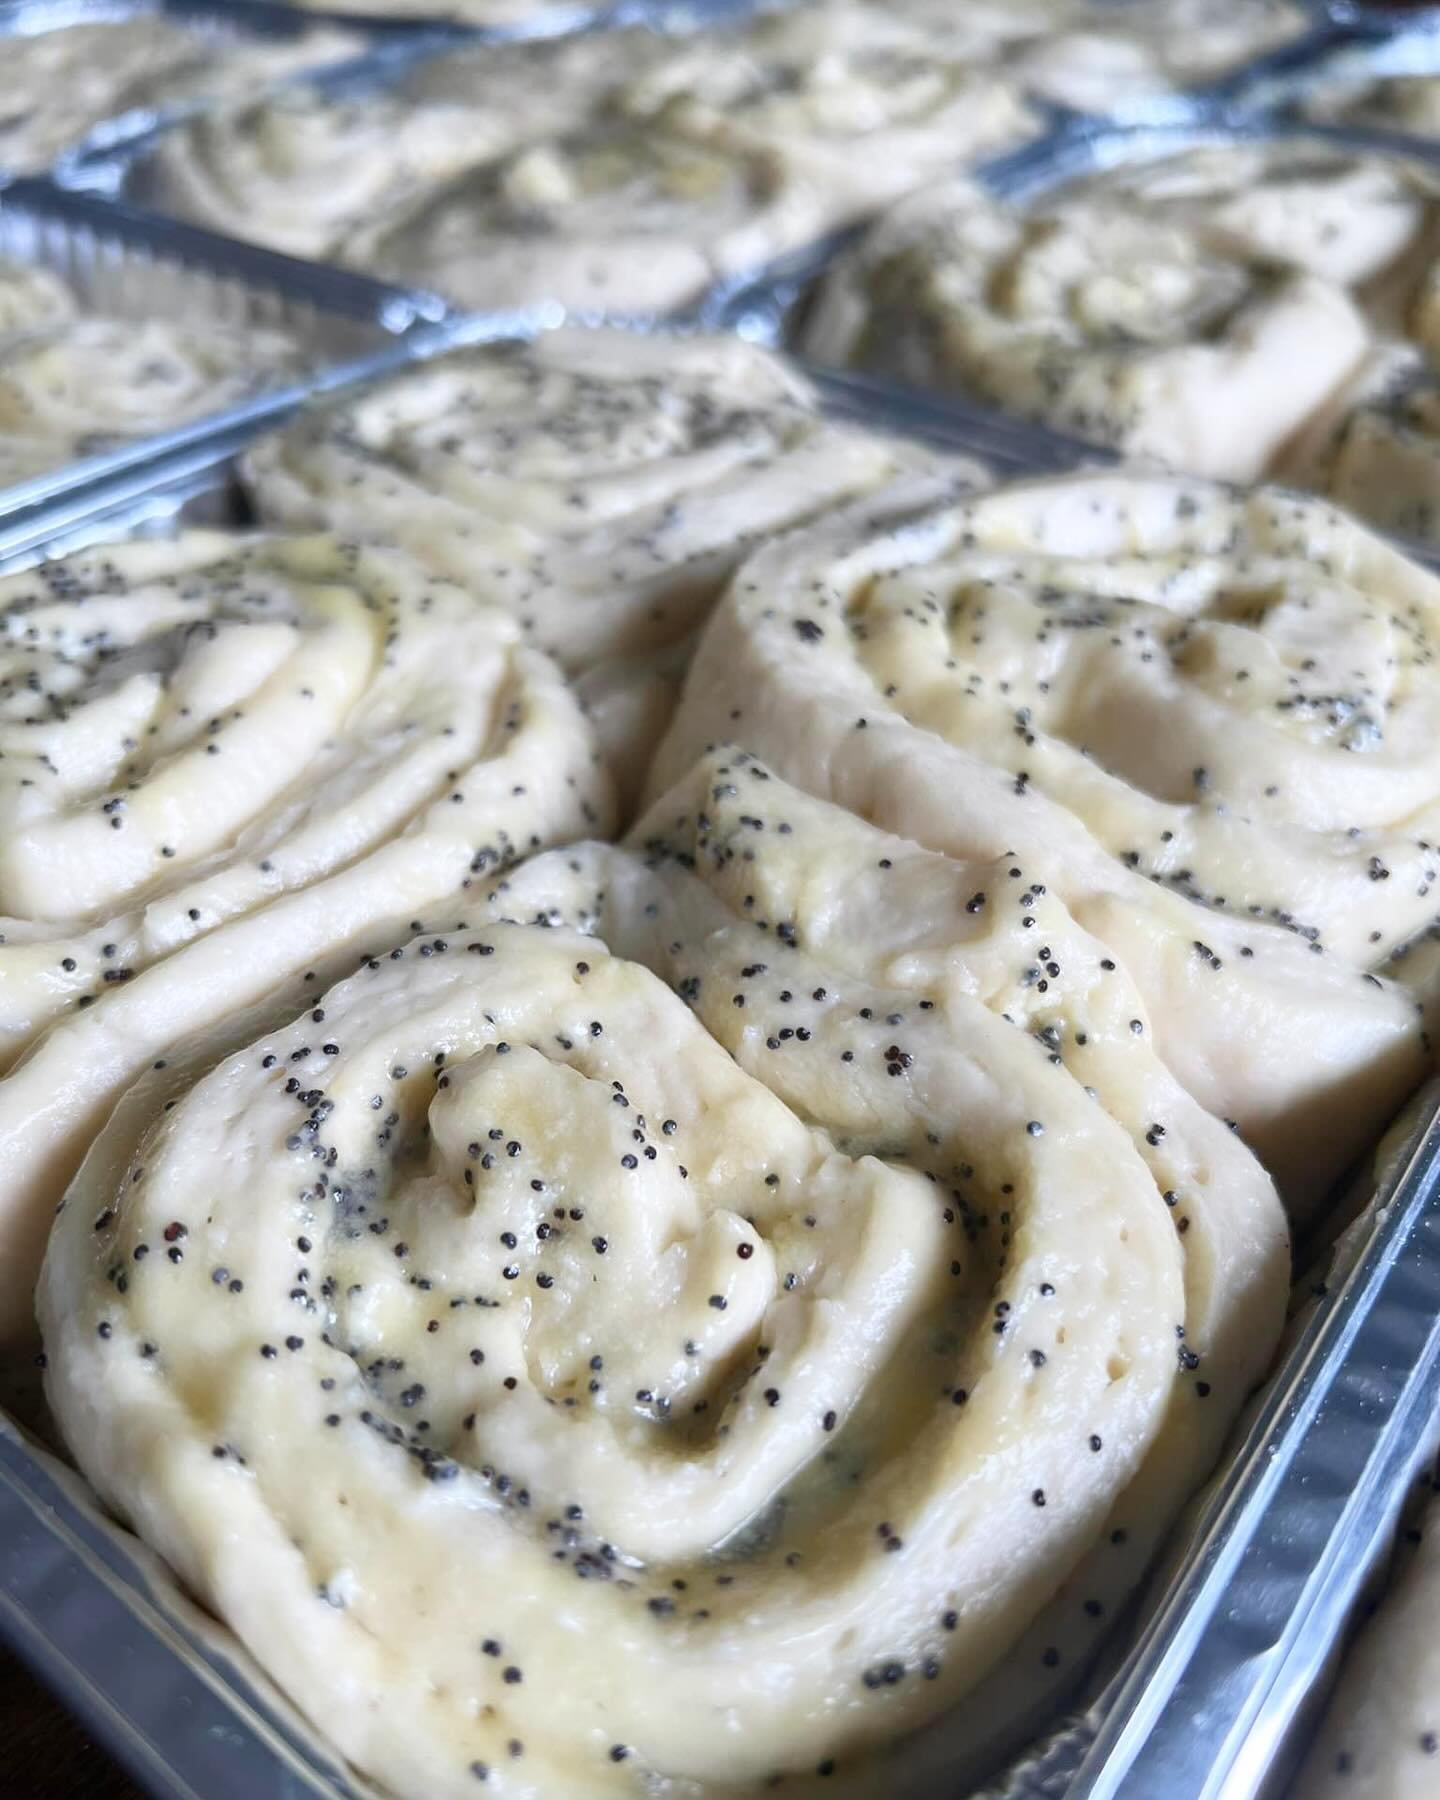 Take &amp; Bake Cinnamon rolls are also available today in the lot from @bizybakesak!! (Along with all of her other pre-made goodies!!) 
Great mother's day idea!!
Open 10-6 today!!